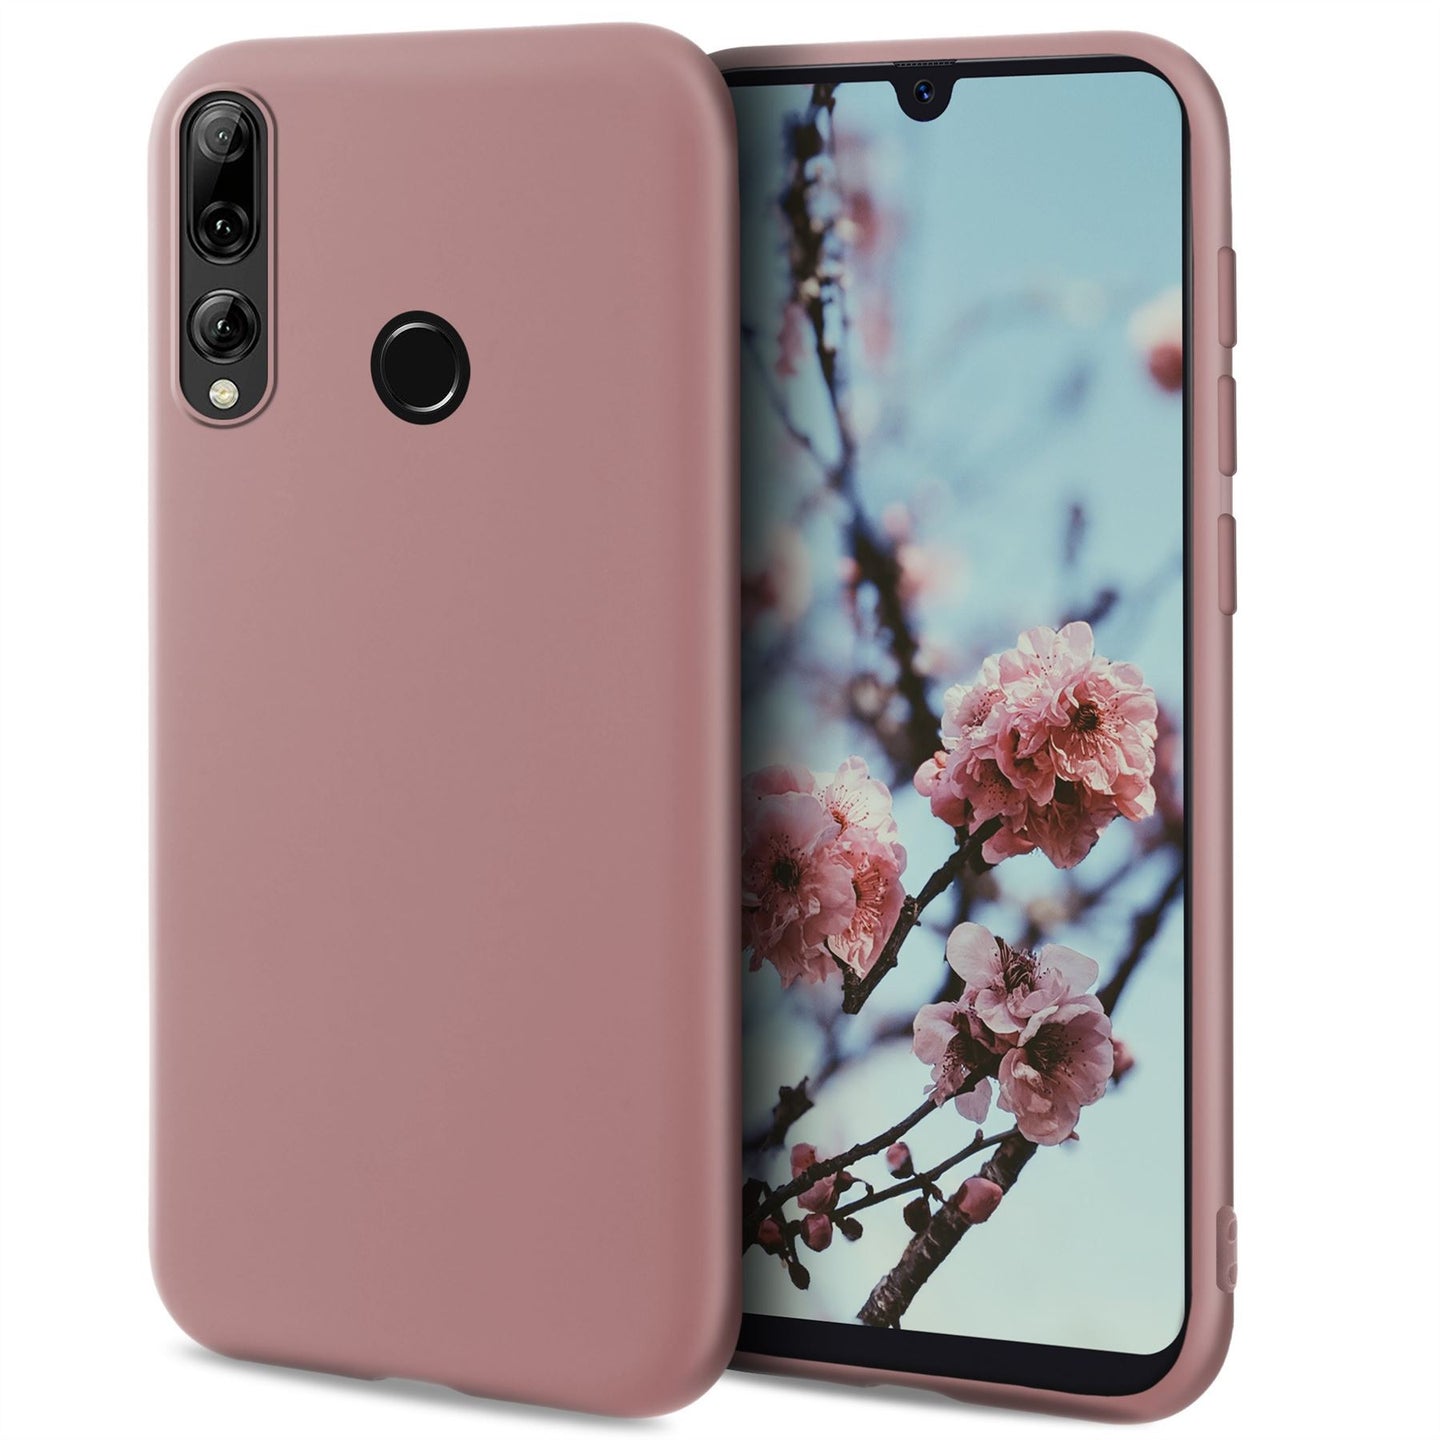 Moozy Minimalist Series Silicone Case for Huawei P Smart Plus 2019 and Honor 20 Lite, Rose Beige - Matte Finish Slim Soft TPU Cover